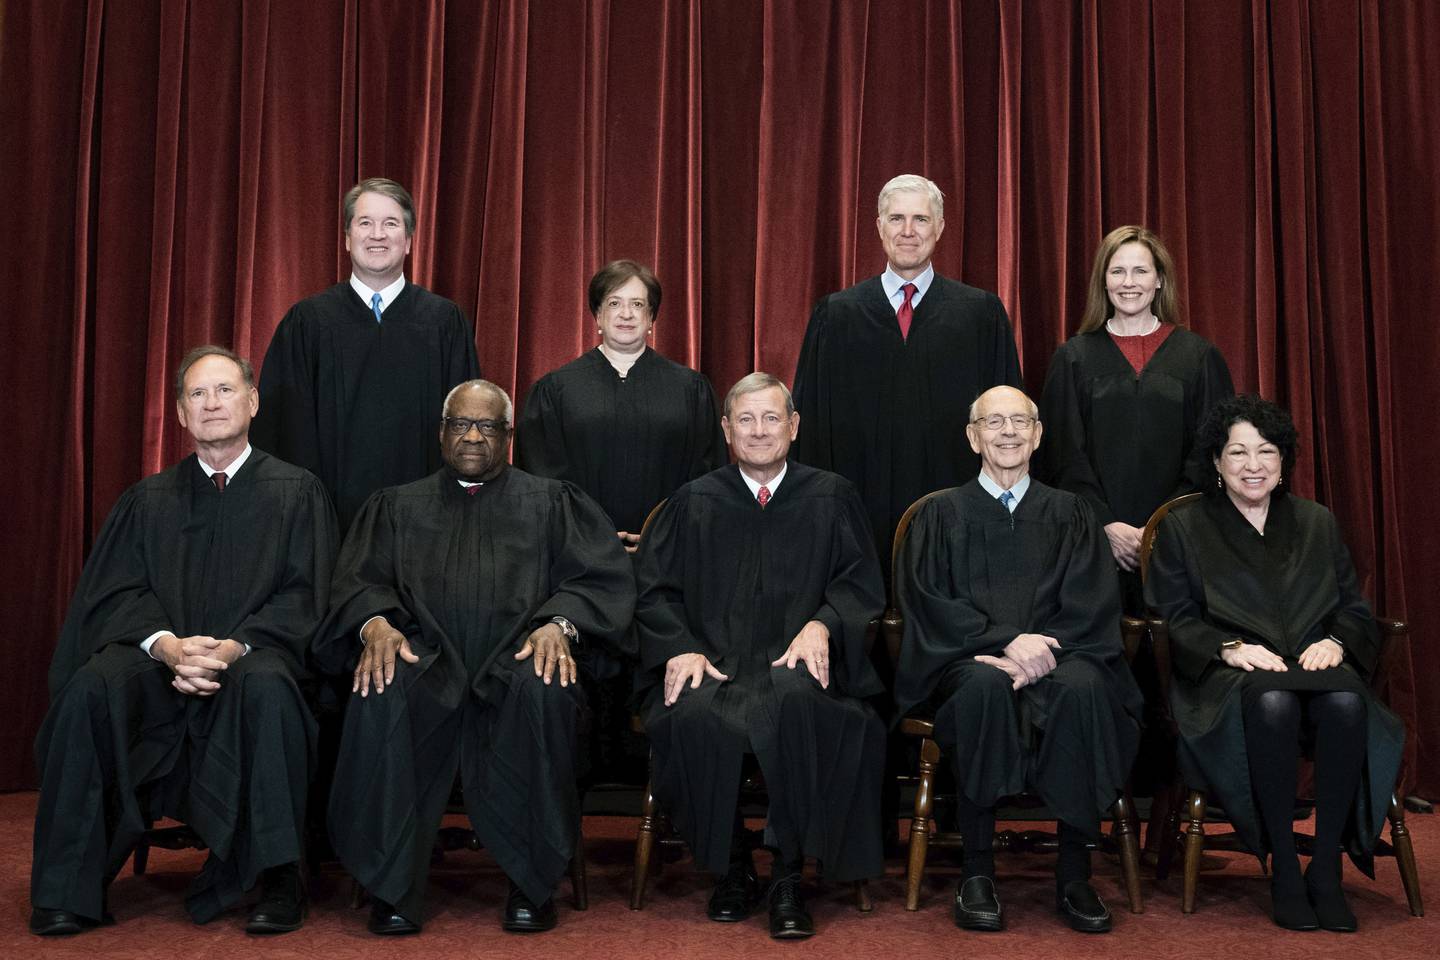 Members of the US Supreme Court pose for a group photo at the Supreme Court in Washington, on April 23, 2021. AP